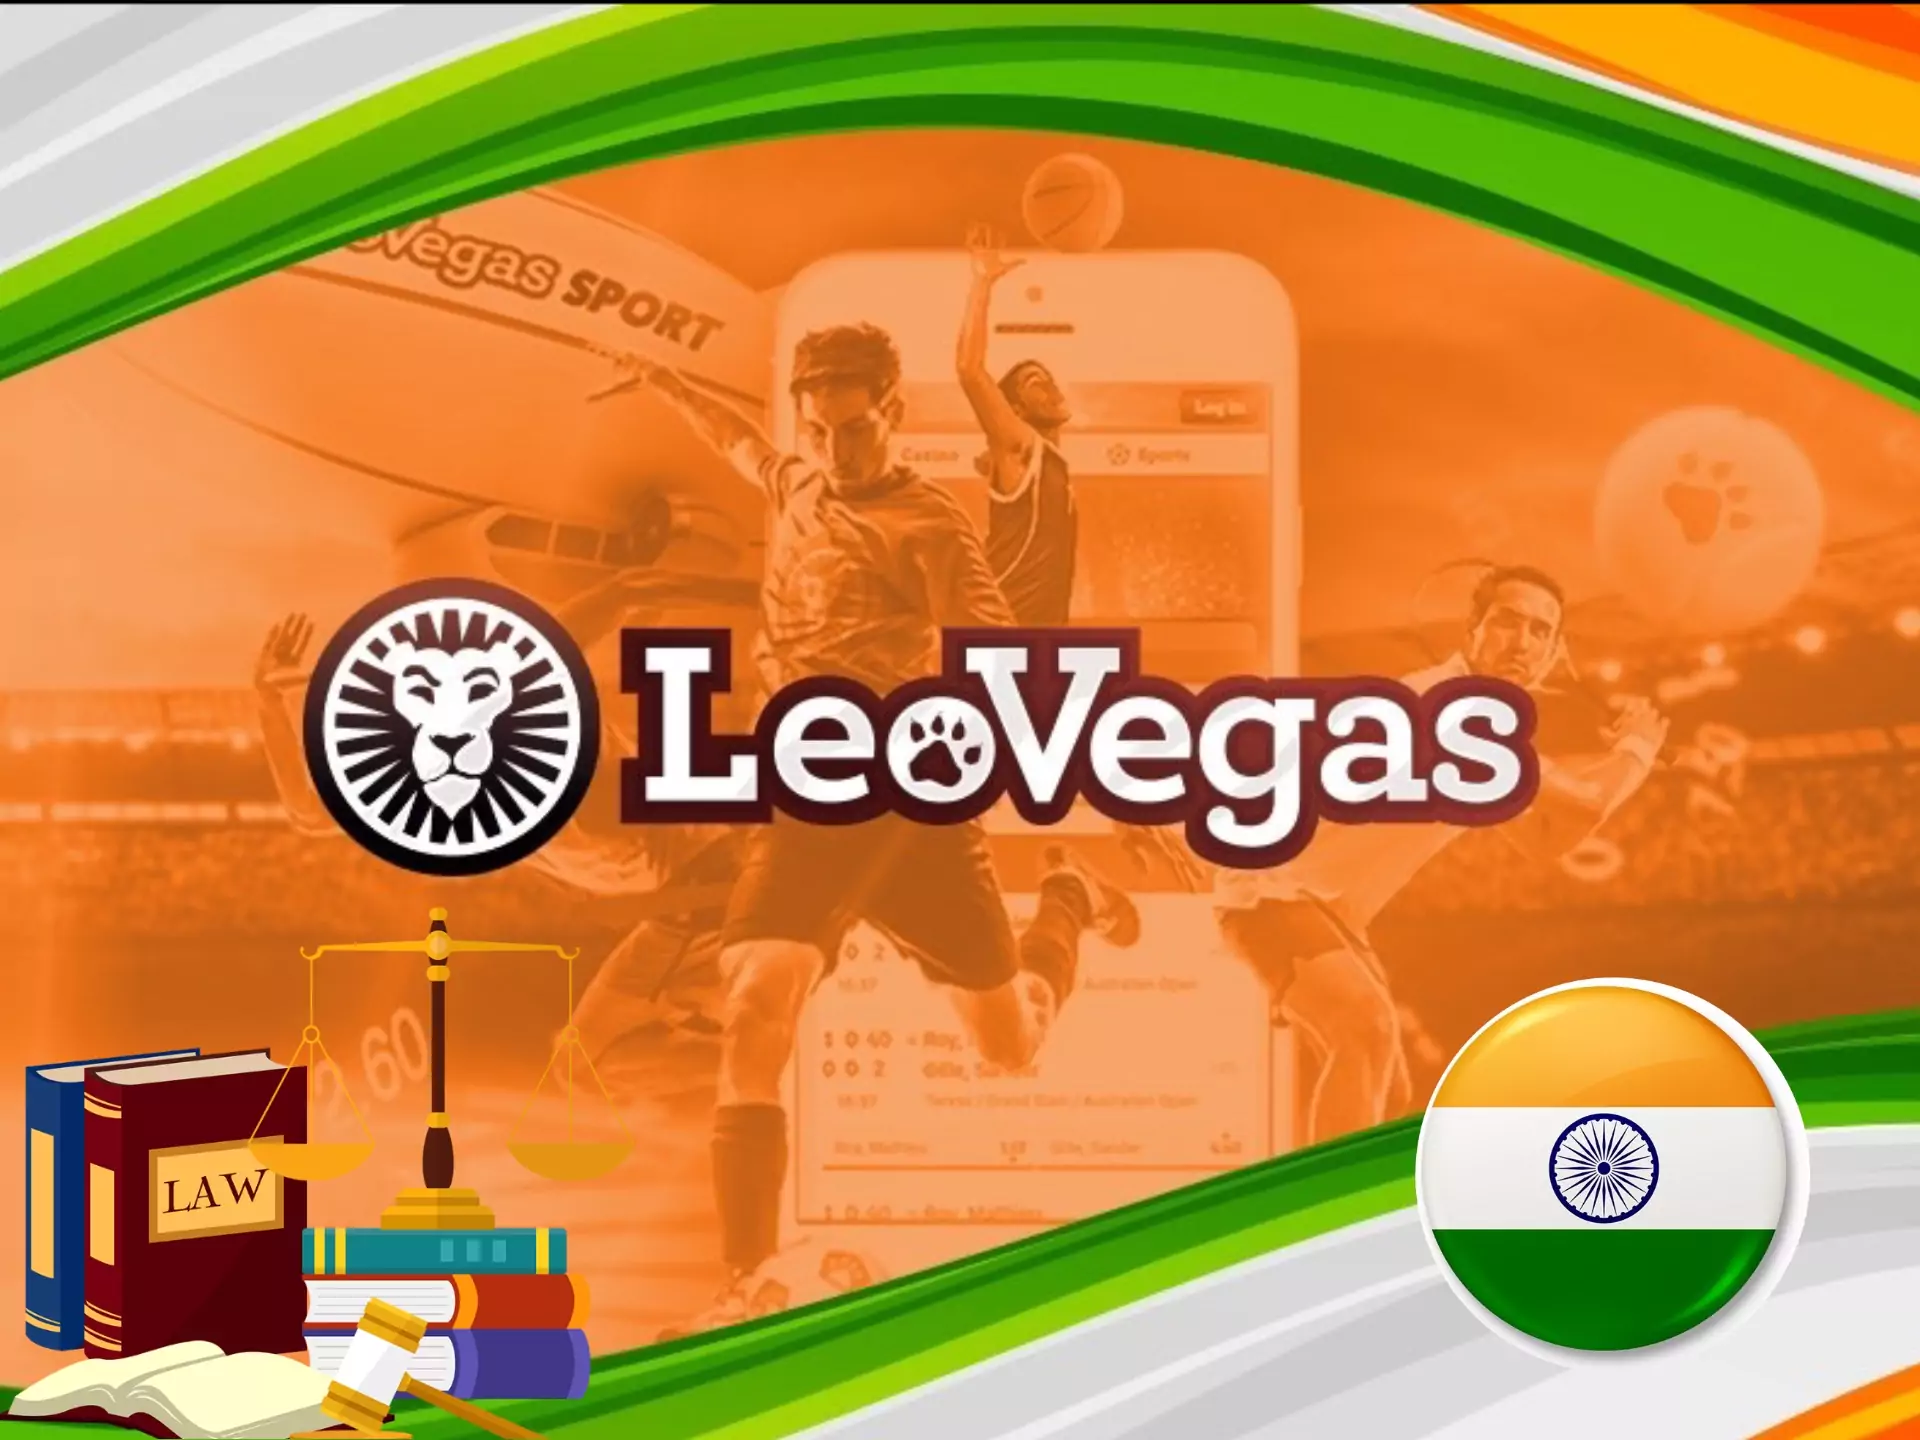 Betting via LeoVegas is safe and legal in India.